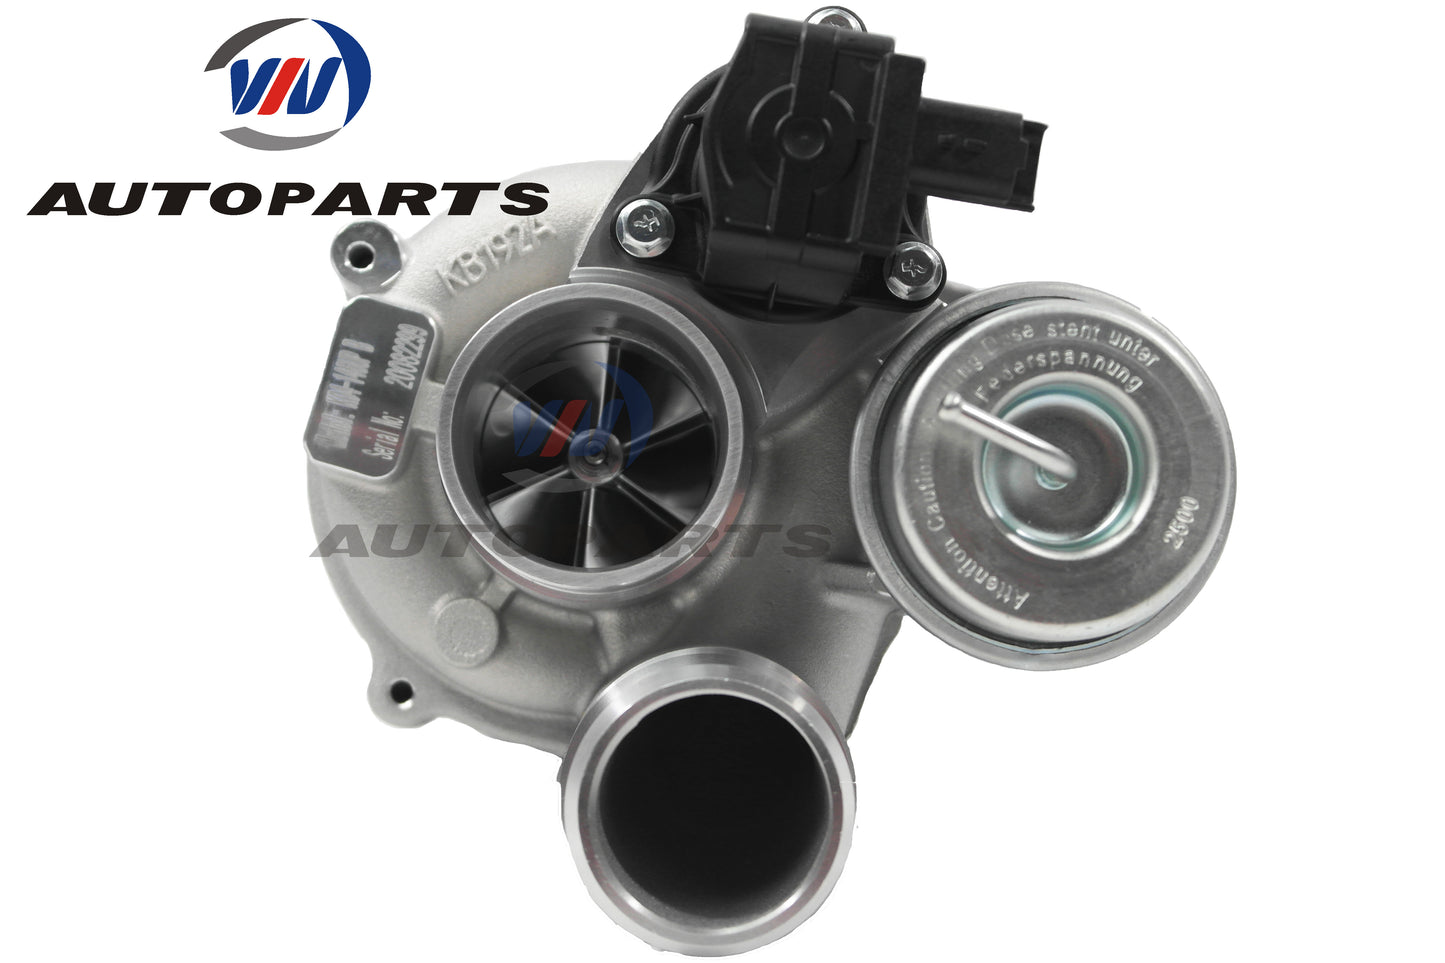 Upgrade K04 F21M Billet Turbo Charger For Mini Cooper R55 R56 R57 R58 R59 R60 R61 1.6T